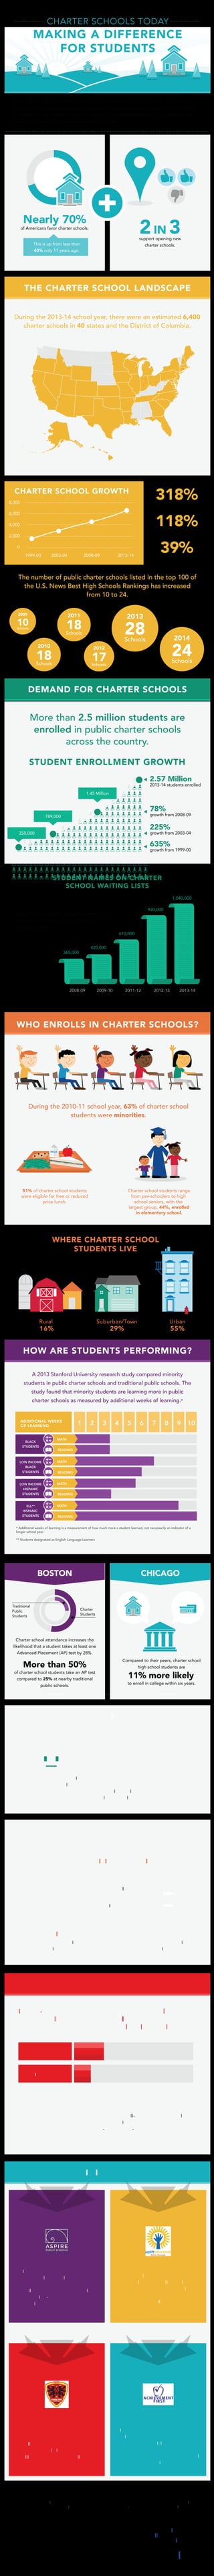 THE CHARTER SCHOOL LANDSCAPE
DEMAND FOR CHARTER SCHOOLS
WHO ENROLLS IN CHARTER SCHOOLS?
HOW ARE STUDENTS PERFORMING?
2IN 3support opening new
charter schools.
Charter schools are public schools that are given the freedom to innovate while being held
accountable for advancing student achievement. They create an environment in which parents
are partners in their child's education, teachers are allowed to innovate in the classroom, and
students are provided the structure they need to learn.
During the 2013-14 school year, there were an estimated 6,400
charter schools in 40 states and the District of Columbia.
CHARTER SCHOOL GROWTH
Since 2008, the number of student names on
charter school waiting lists has grown by a
staggering 186%.
During the 2010-11 school year, 63% of charter school
students were minorities.
51% of charter school students
were eligible for free or reduced
price lunch.
Charter school students range
from pre-schoolers to high
school seniors, with the
largest group, 44%, enrolled
in elementary school.
WHERE CHARTER SCHOOL
STUDENTS LIVE
A 2013 Stanford University research study compared minority
students in public charter schools and traditional public schools. The
study found that minority students are learning more in public
charter schools as measured by additional weeks of learning.*
In 2011-12, an estimated 25% of teachers in public charter
schools were Hispanic and Black compared to
14% of teachers in traditional public schools.
The number of public charter schools listed in the top 100 of
the U.S. News Best High Schools Rankings has increased
from 10 to 24.
2003-041999-00 2008-09 2013-14
2008-09 2009-10 2011-12 2012-13 2013-14
365,000
420,000
610,000
920,000
1,040,000
Rural
16%
Suburban/Town
29%
Urban
55%
Sources http://online.wsj.com, http://www.tbf.org, http://credo.stanford.edu, http://pdkintl.org,
http://www.rethinkingschools.org, http://www.mathematica-mpr.com, http://www.publiccharters.org,
http://nces.ed.gov, http://www.usnews.com/education, http://www.edreform.com
Nearly 70%
of Americans favor charter schools.
This is up from less than
40% only 11 years ago.
8,000
6,000
4,000
2,000
0
318%growth from 1999-00
118%growth from 2003-04
39%growth from 2008-09
635%
growth from 1999-00
225%
growth from 2003-04
78%
growth from 2008-09
2.57 Million
2013-14 students enrolled
STUDENT ENROLLMENT GROWTH
2009
10Schools
2011
18Schools
2010
18Schools
2012
17Schools
2013
28Schools 2014
24Schools
More than 2.5 million students are
enrolled in public charter schools
across the country.
READING
MATH
READING
MATH
READING
MATH
READING
READING
MATH
BLACK
STUDENTS
LOW INCOME
BLACK
STUDENTS
LOW INCOME
HISPANIC
STUDENTS
ELL**
HISPANIC
STUDENTS
ADDITIONAL WEEKS
OF LEARNING 1 2 3 4 5 6 7 8 9 10
Charter school attendance increases the
likelihood that a student takes at least one
Advanced Placement (AP) test by 28%.
More than 50%
of charter school students take an AP test
compared to 25% at nearby traditional
public schools.
BOSTON
FLORIDA
LOS ANGELES
CHICAGO
Charter
Students
Traditional
Public
Students
Compared to their peers, charter school
high school students are
11% more likely
to enroll in college within six years.
Charter high school attendance is associated with a 12.7% increase in
maximum annual earnings for students between ages 23 and 25 compared
to students who attended a charter middle school, but went on to attend a
traditional high school.
PERFORMANCE OF LOS ANGELES CHARTER SCHOOLS
COMPARED TO TRADITIONAL PUBLIC SCHOOLS
WHO TEACHES AT CHARTER SCHOOLS?
SHINING STARS
The number of full-time teachers in public
charter schools grew by 60% between
2007-08 and 2011-12.
In the past four years, 100% of
Aspire Public Schools’ graduating
seniors have been accepted to
college. Aspire predominantly
serves low-income students in
California and Tennessee.
For the last three years, every
single one of Dallas’ Uplift
Education charter school
graduates has been accepted
to college.
Urban Prep Academies in
Chicago serves 100% minority
students and has had 100%
college acceptance rates since
their inaugural class in 2010. The
Illinois state average college
acceptance rate is 57%.
In 2013, 98% of Achievement First’s
black seniors in Connecticut, New
York, and Rhode Island took the SAT
exam, achieving an average score
200 points higher than the national
average for black students.
STUDENT NAMES ON CHARTER
SCHOOL WAITING LISTS
* Additional weeks of learning is a measurement of how much more a student learned, not necessarily an indicator of a
longer school year.
** Students designated as English Language Learners
READING MATH
48% 44%
60%
CHARTER SCHOOLS
PUBLIC SCHOOLS
25%
14%
1.45 Million
350,000
789,000
Gained 50 additional
days of learning
Gained 79 additional
days of learning
Charter school
students
performed
signi cantly better
in both reading
and math.
CHARTER SCHOOLS TODAY
MAKING A DIFFERENCE
FOR STUDENTS
 